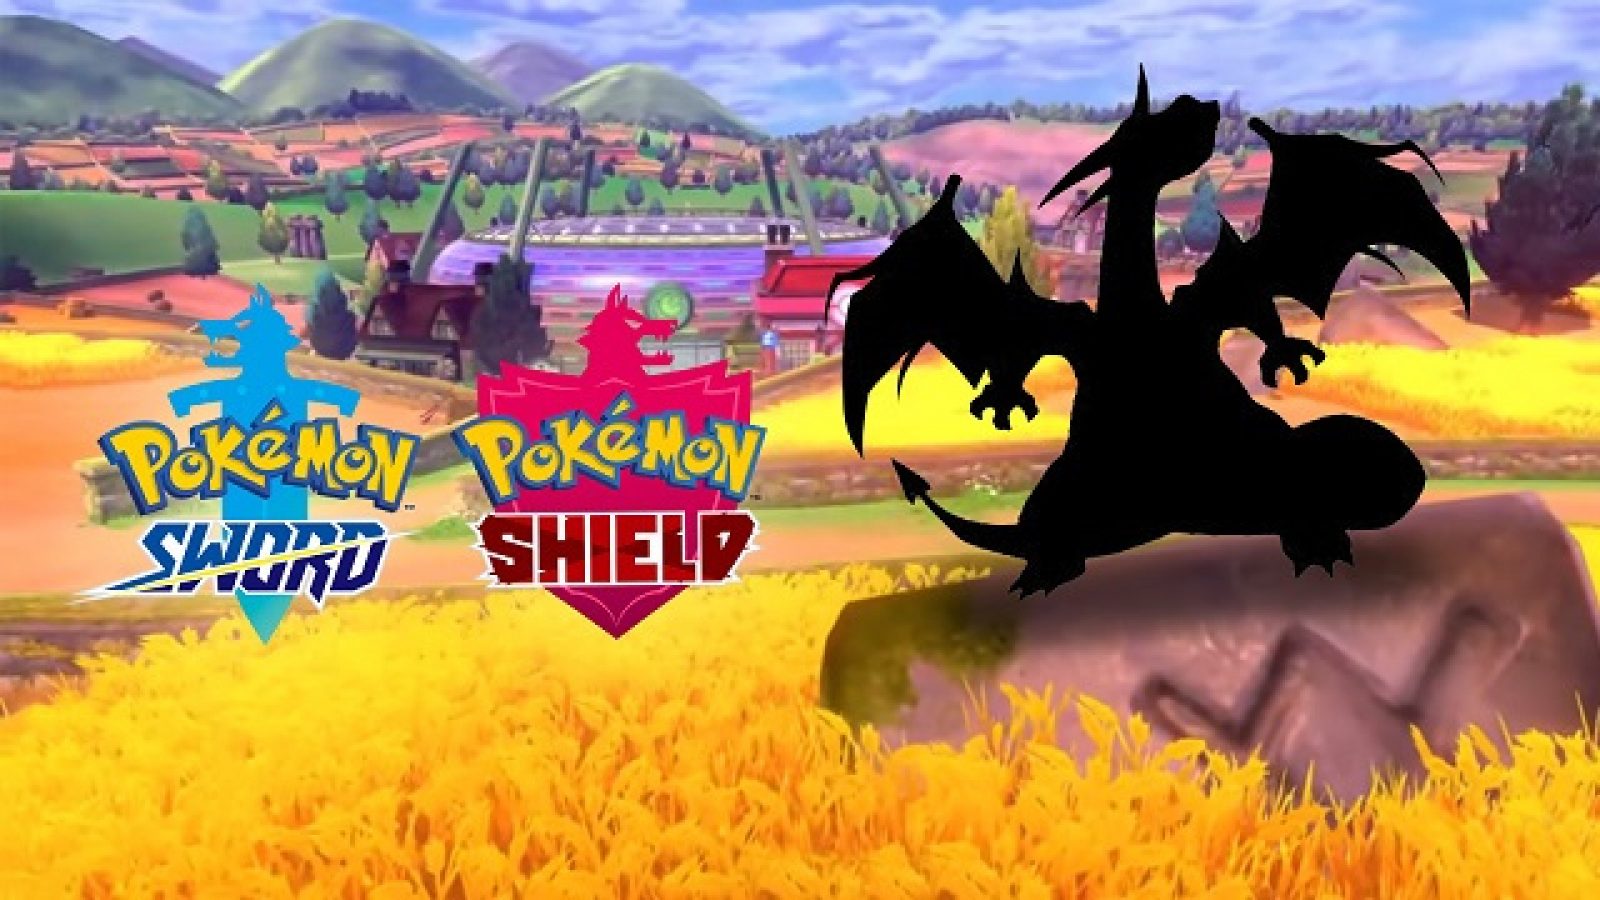 17 Galar Region Exclusives Leaked For Pokemon Sword - Pokémon Sword And Shield , HD Wallpaper & Backgrounds